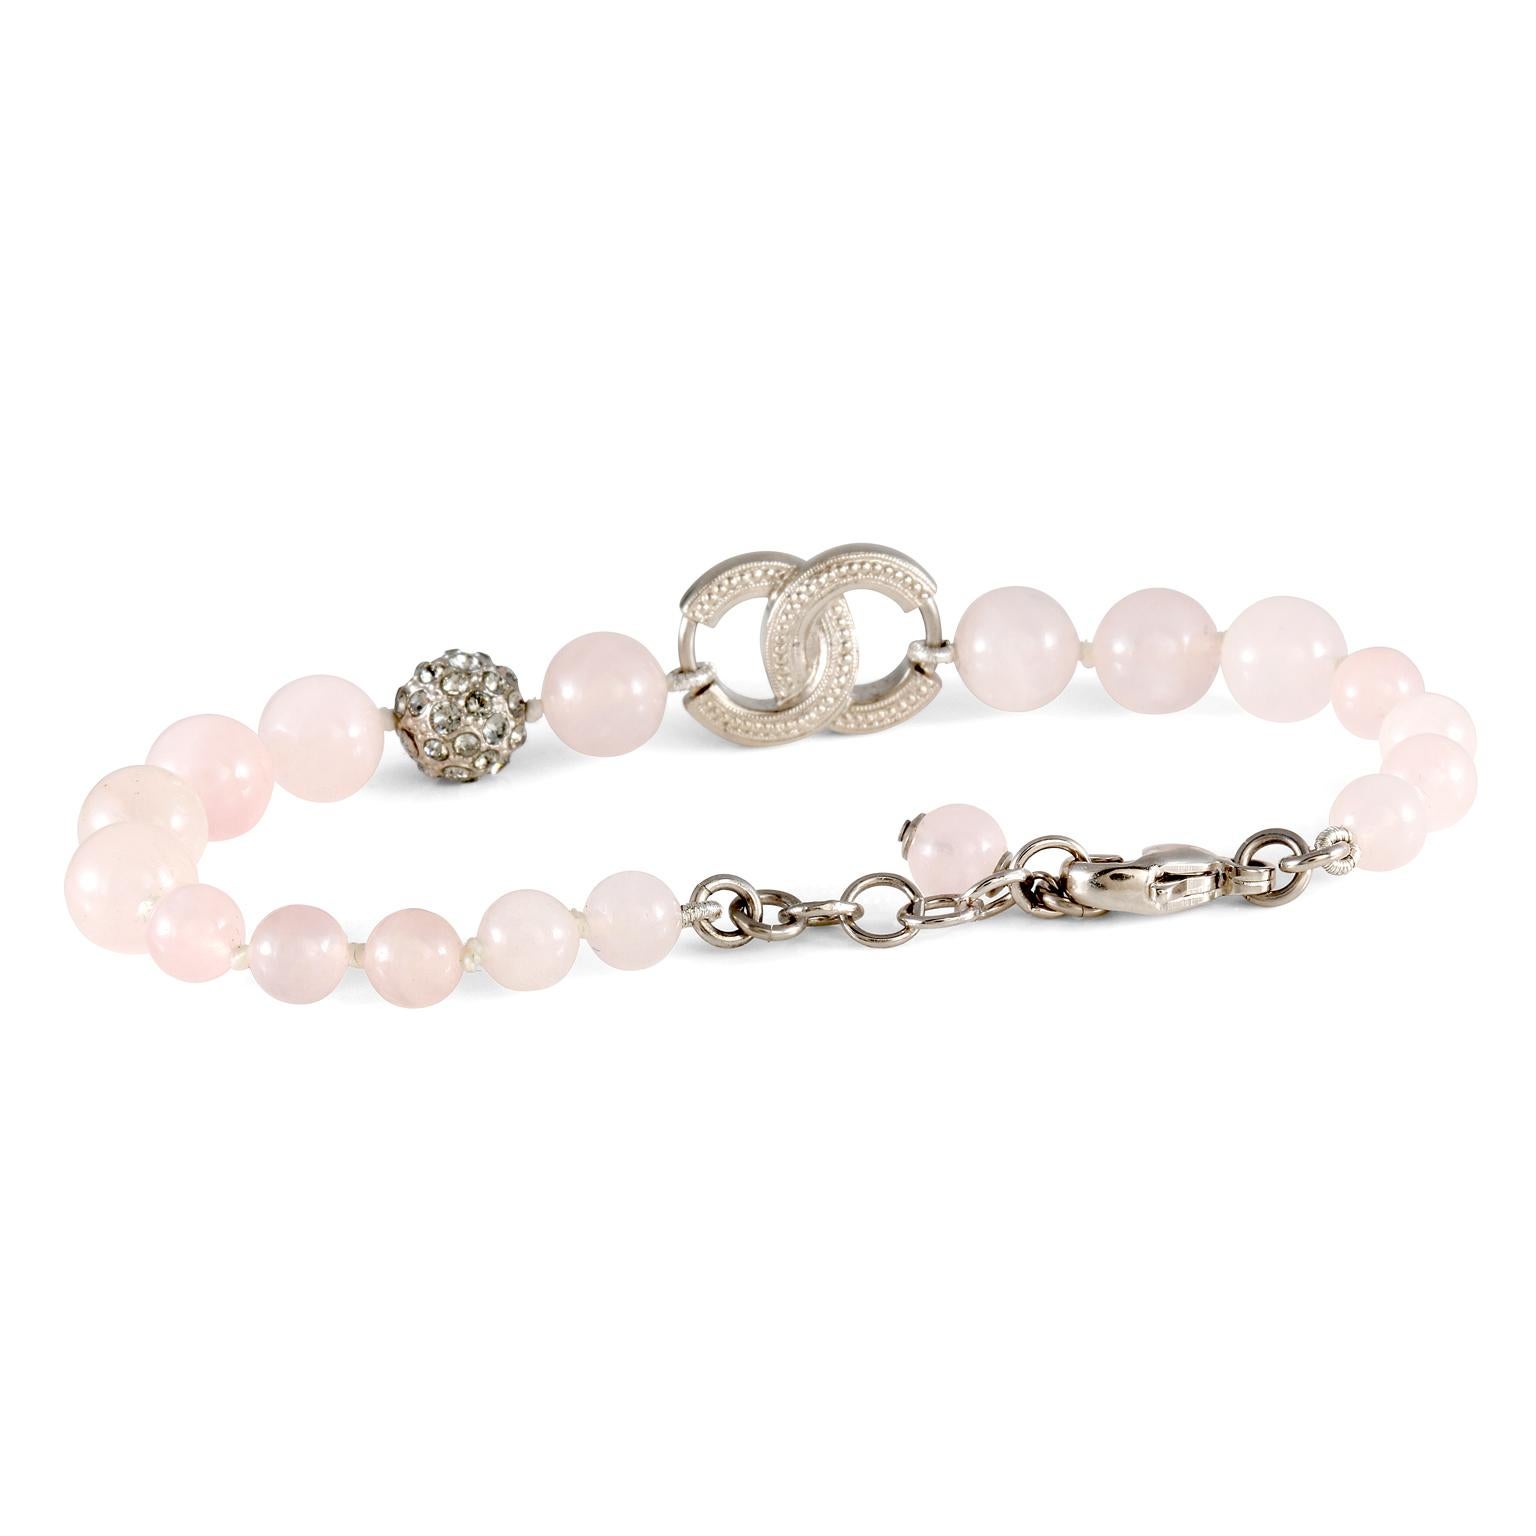 This authentic Chanel Rose Quartz CC Beaded bracelet is in excellent condition.  Soft pink rose quartz beads with silver tone crystal interlocking CC.  Adjustable length approximately 7 inches.  Made in France.  Pouch or box included.

 
